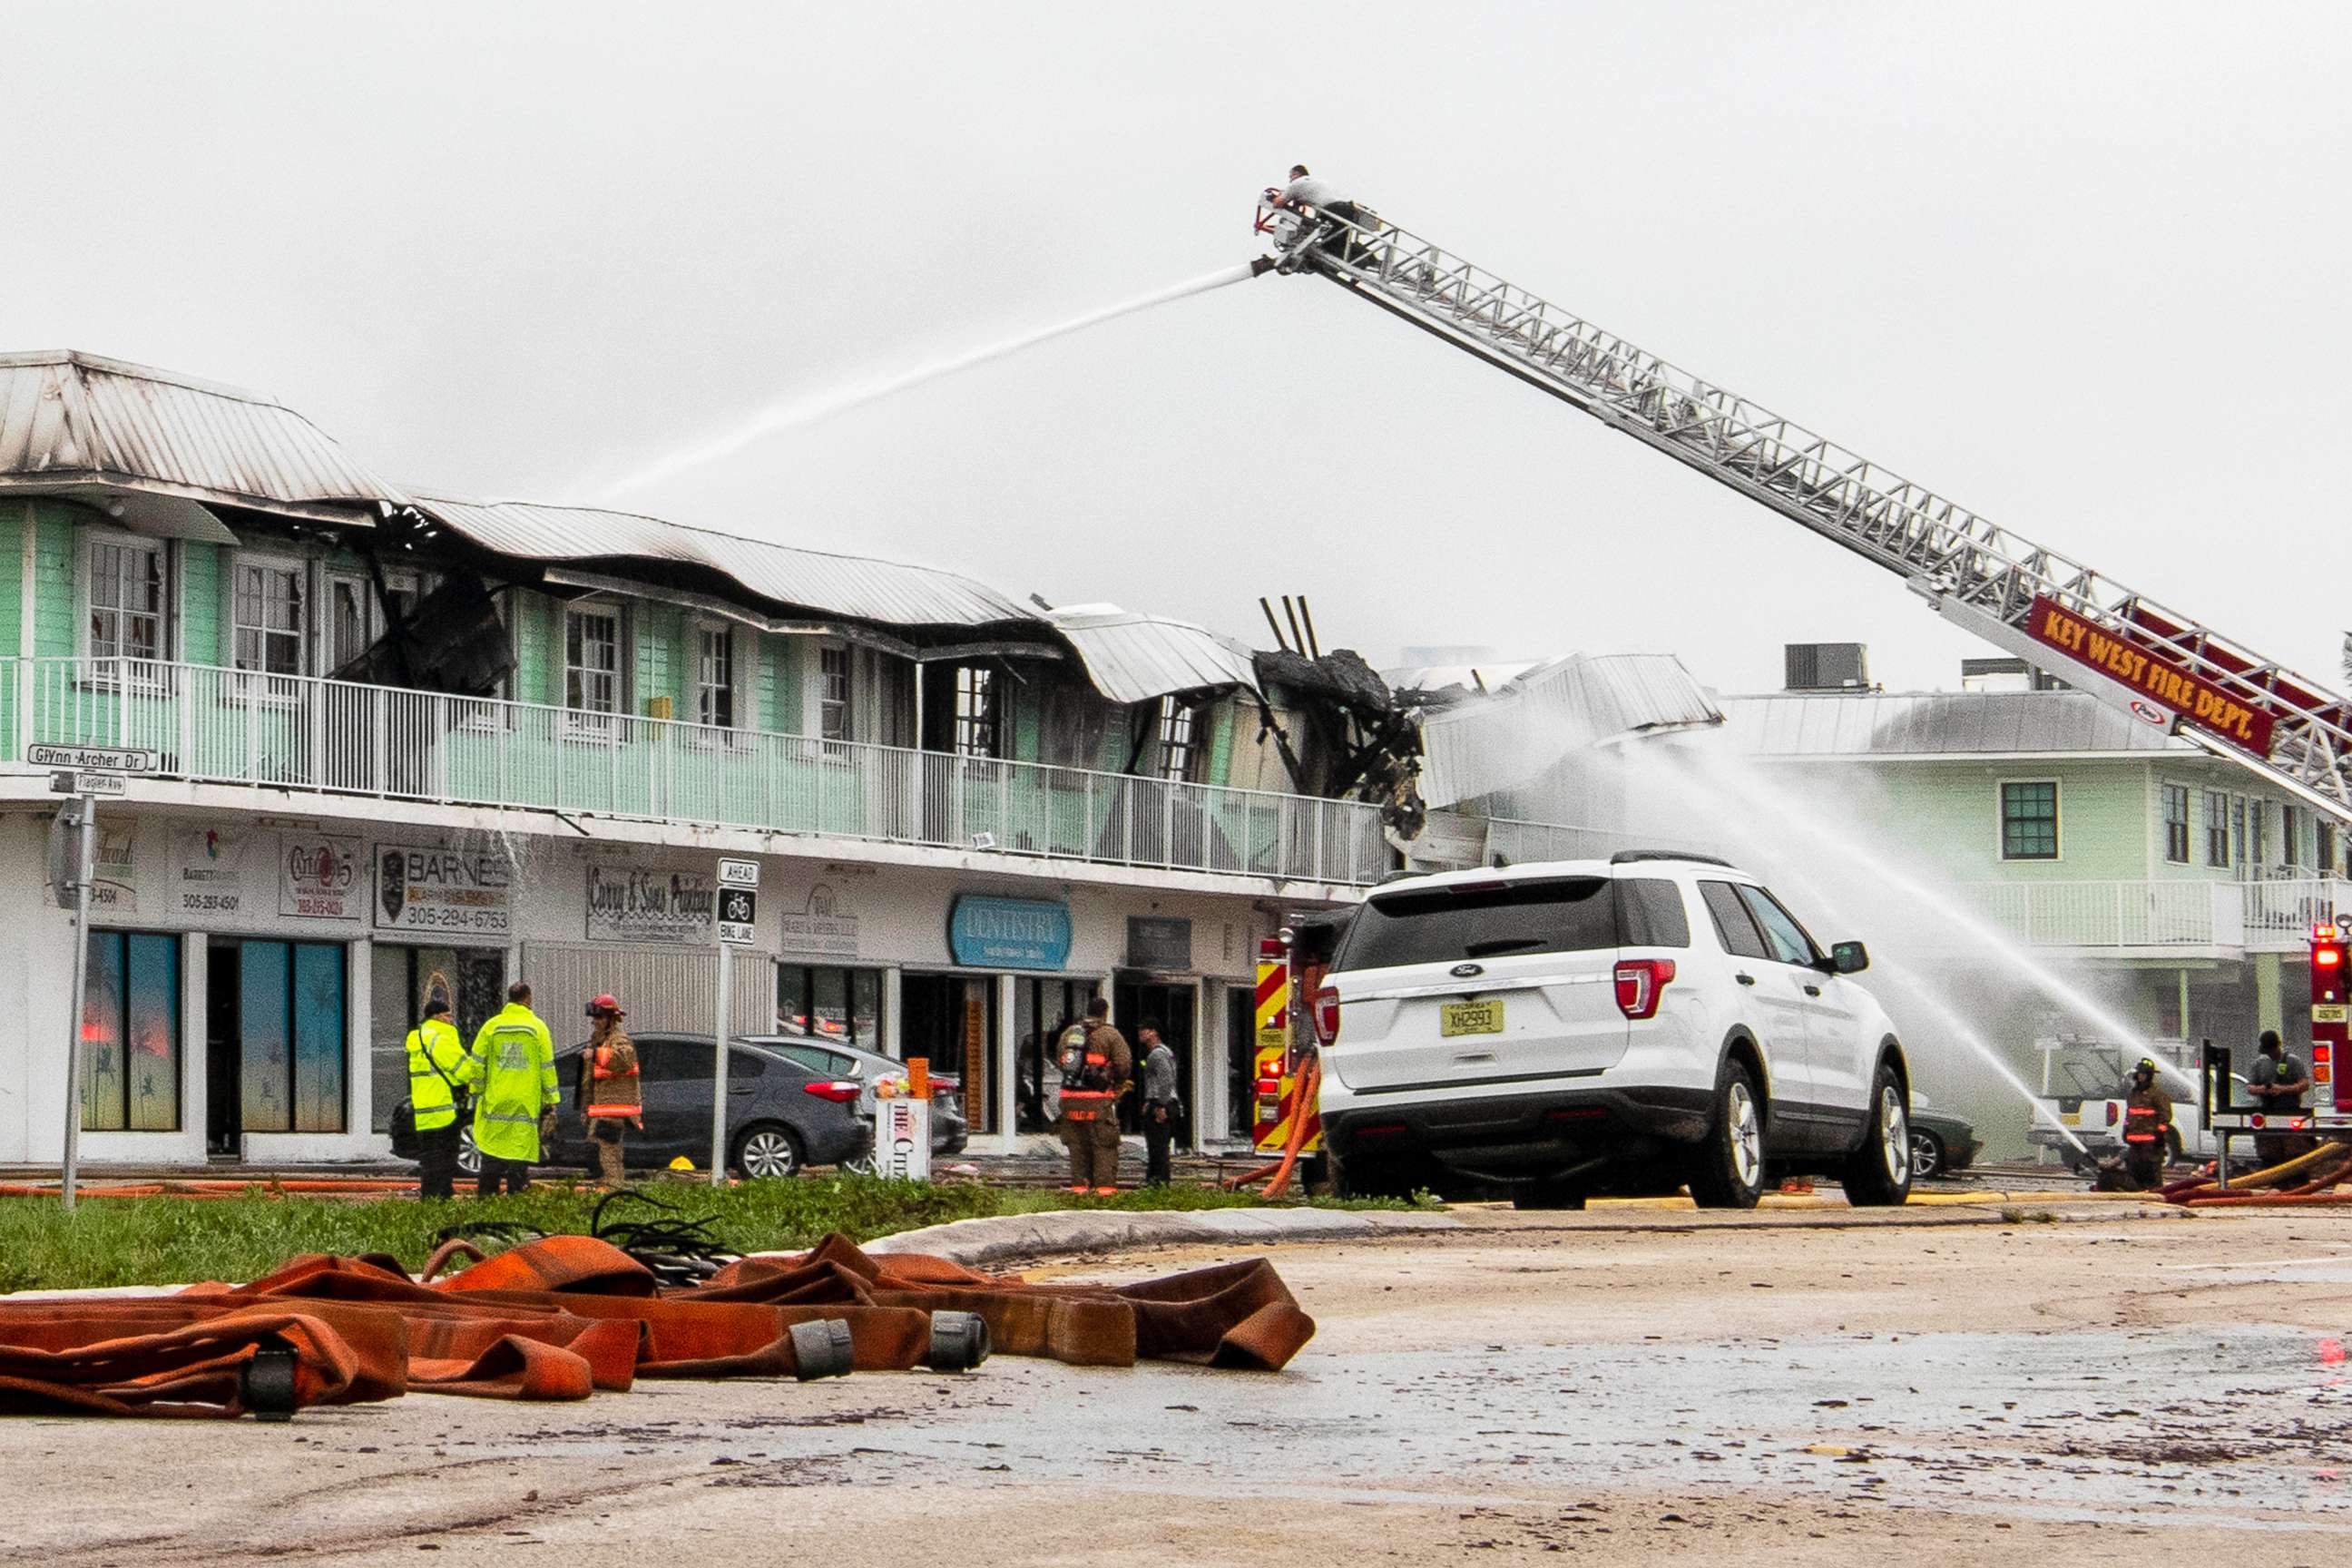 PHOTO: Key West Fire Department works on a strip mall fire on Flagler Ave., in midtown Key West, Fla., in the aftermath of Hurricane Ian's tropical winds, Sept. 28, 2022.